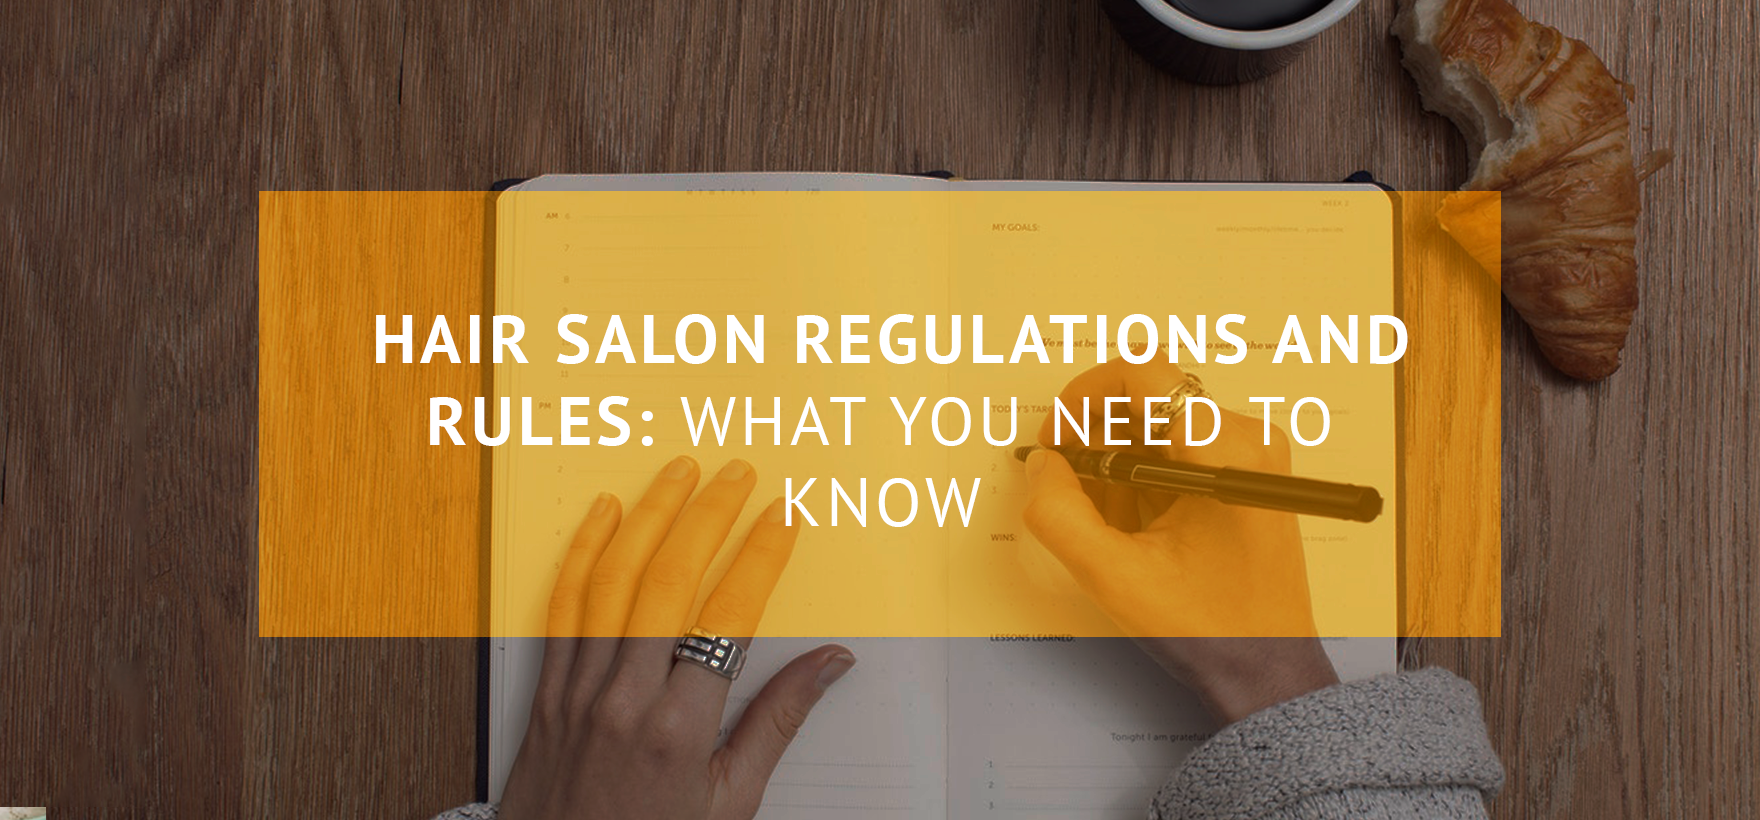 Hair Salon Regulations and Rules